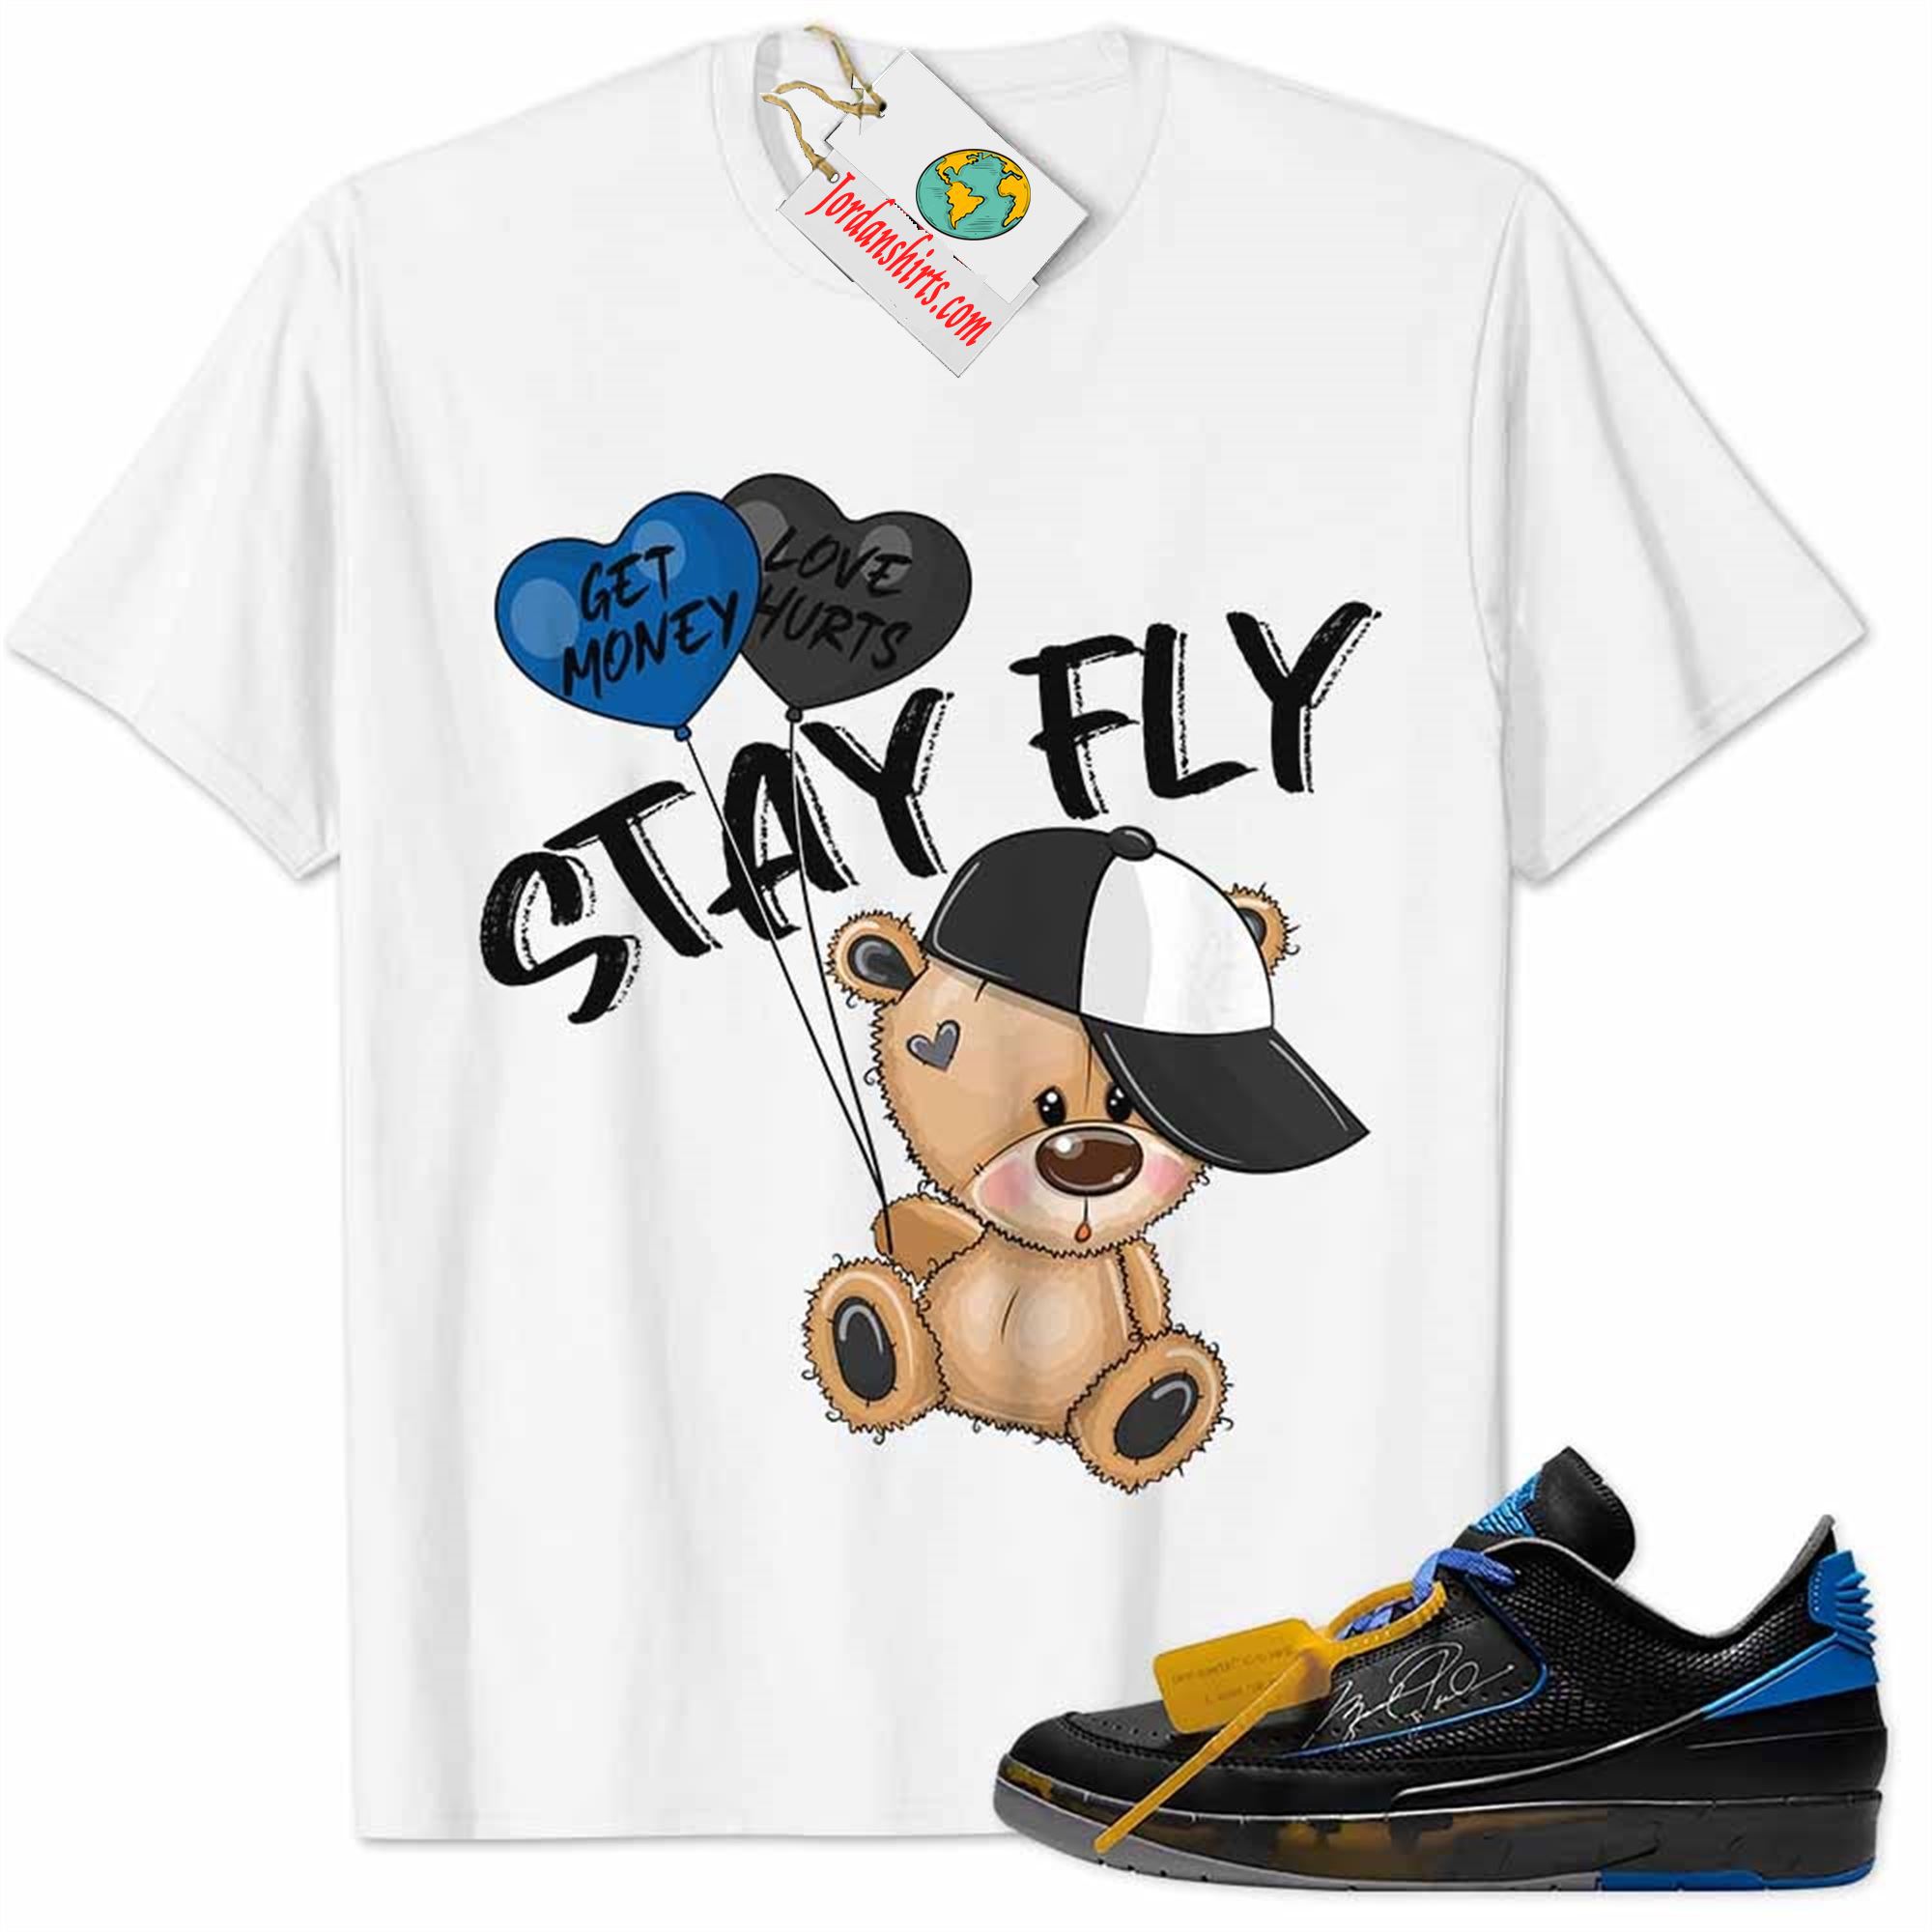 Jordan 2 Shirt, Low X Off-white Black And Varsity Royal 2s Shirt Cute Teddy Bear Stay Fly Get Money White Full Size Up To 5xl